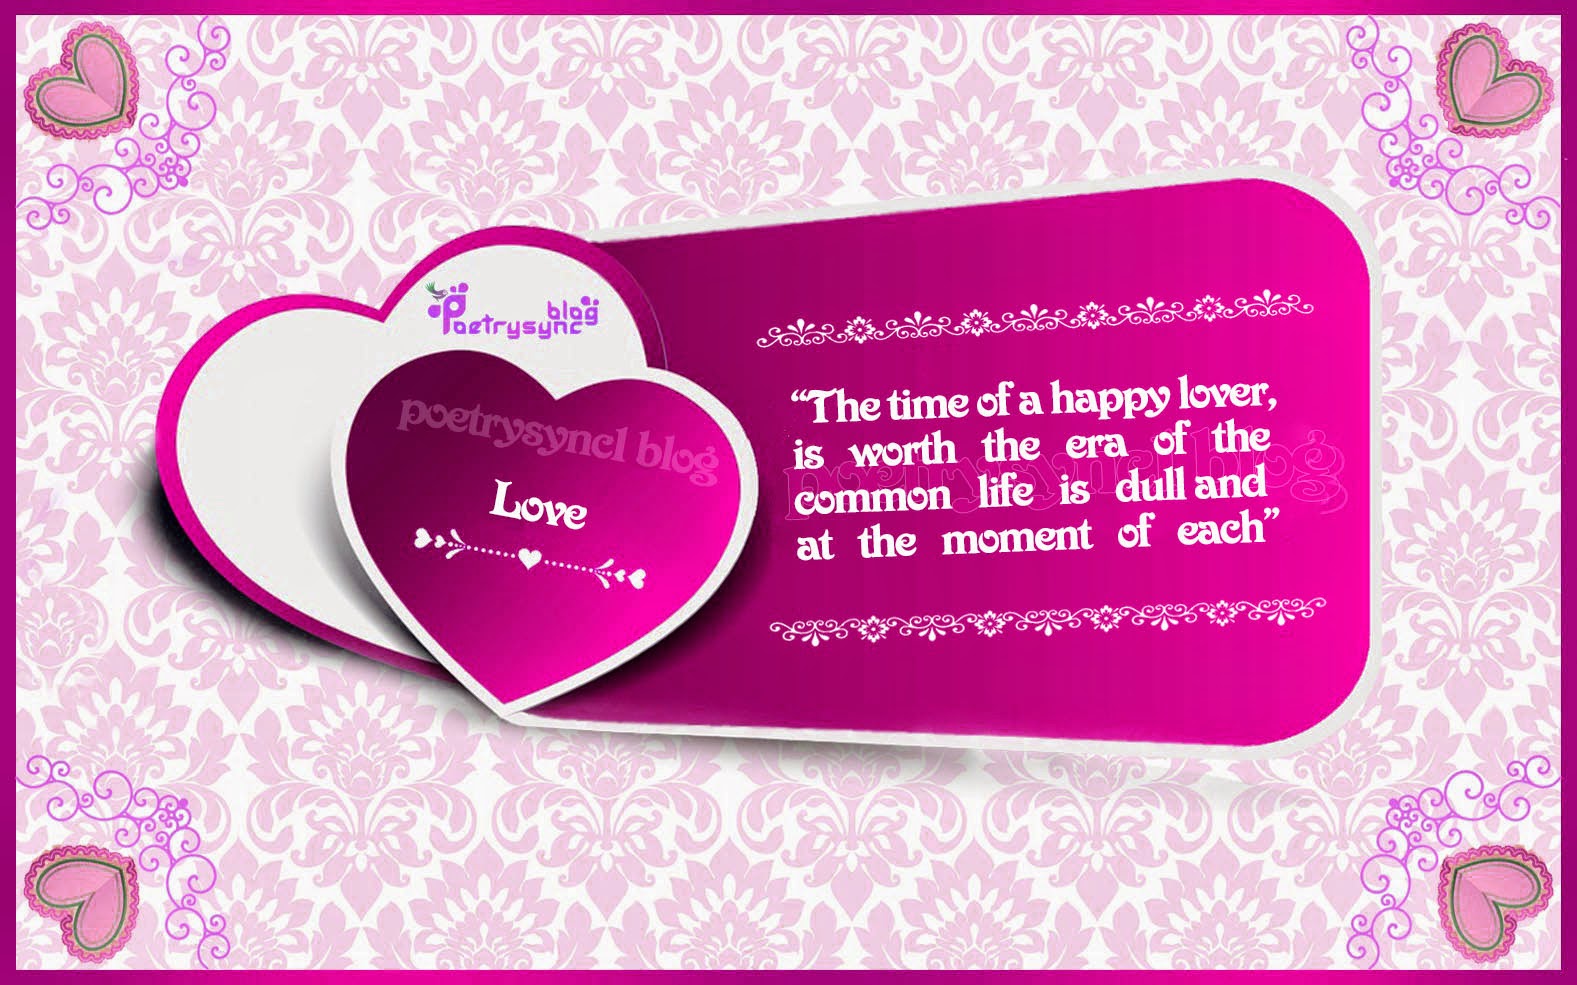 love-quotes-the-time-of-a-happy-lover-by-poetrysync1-blog